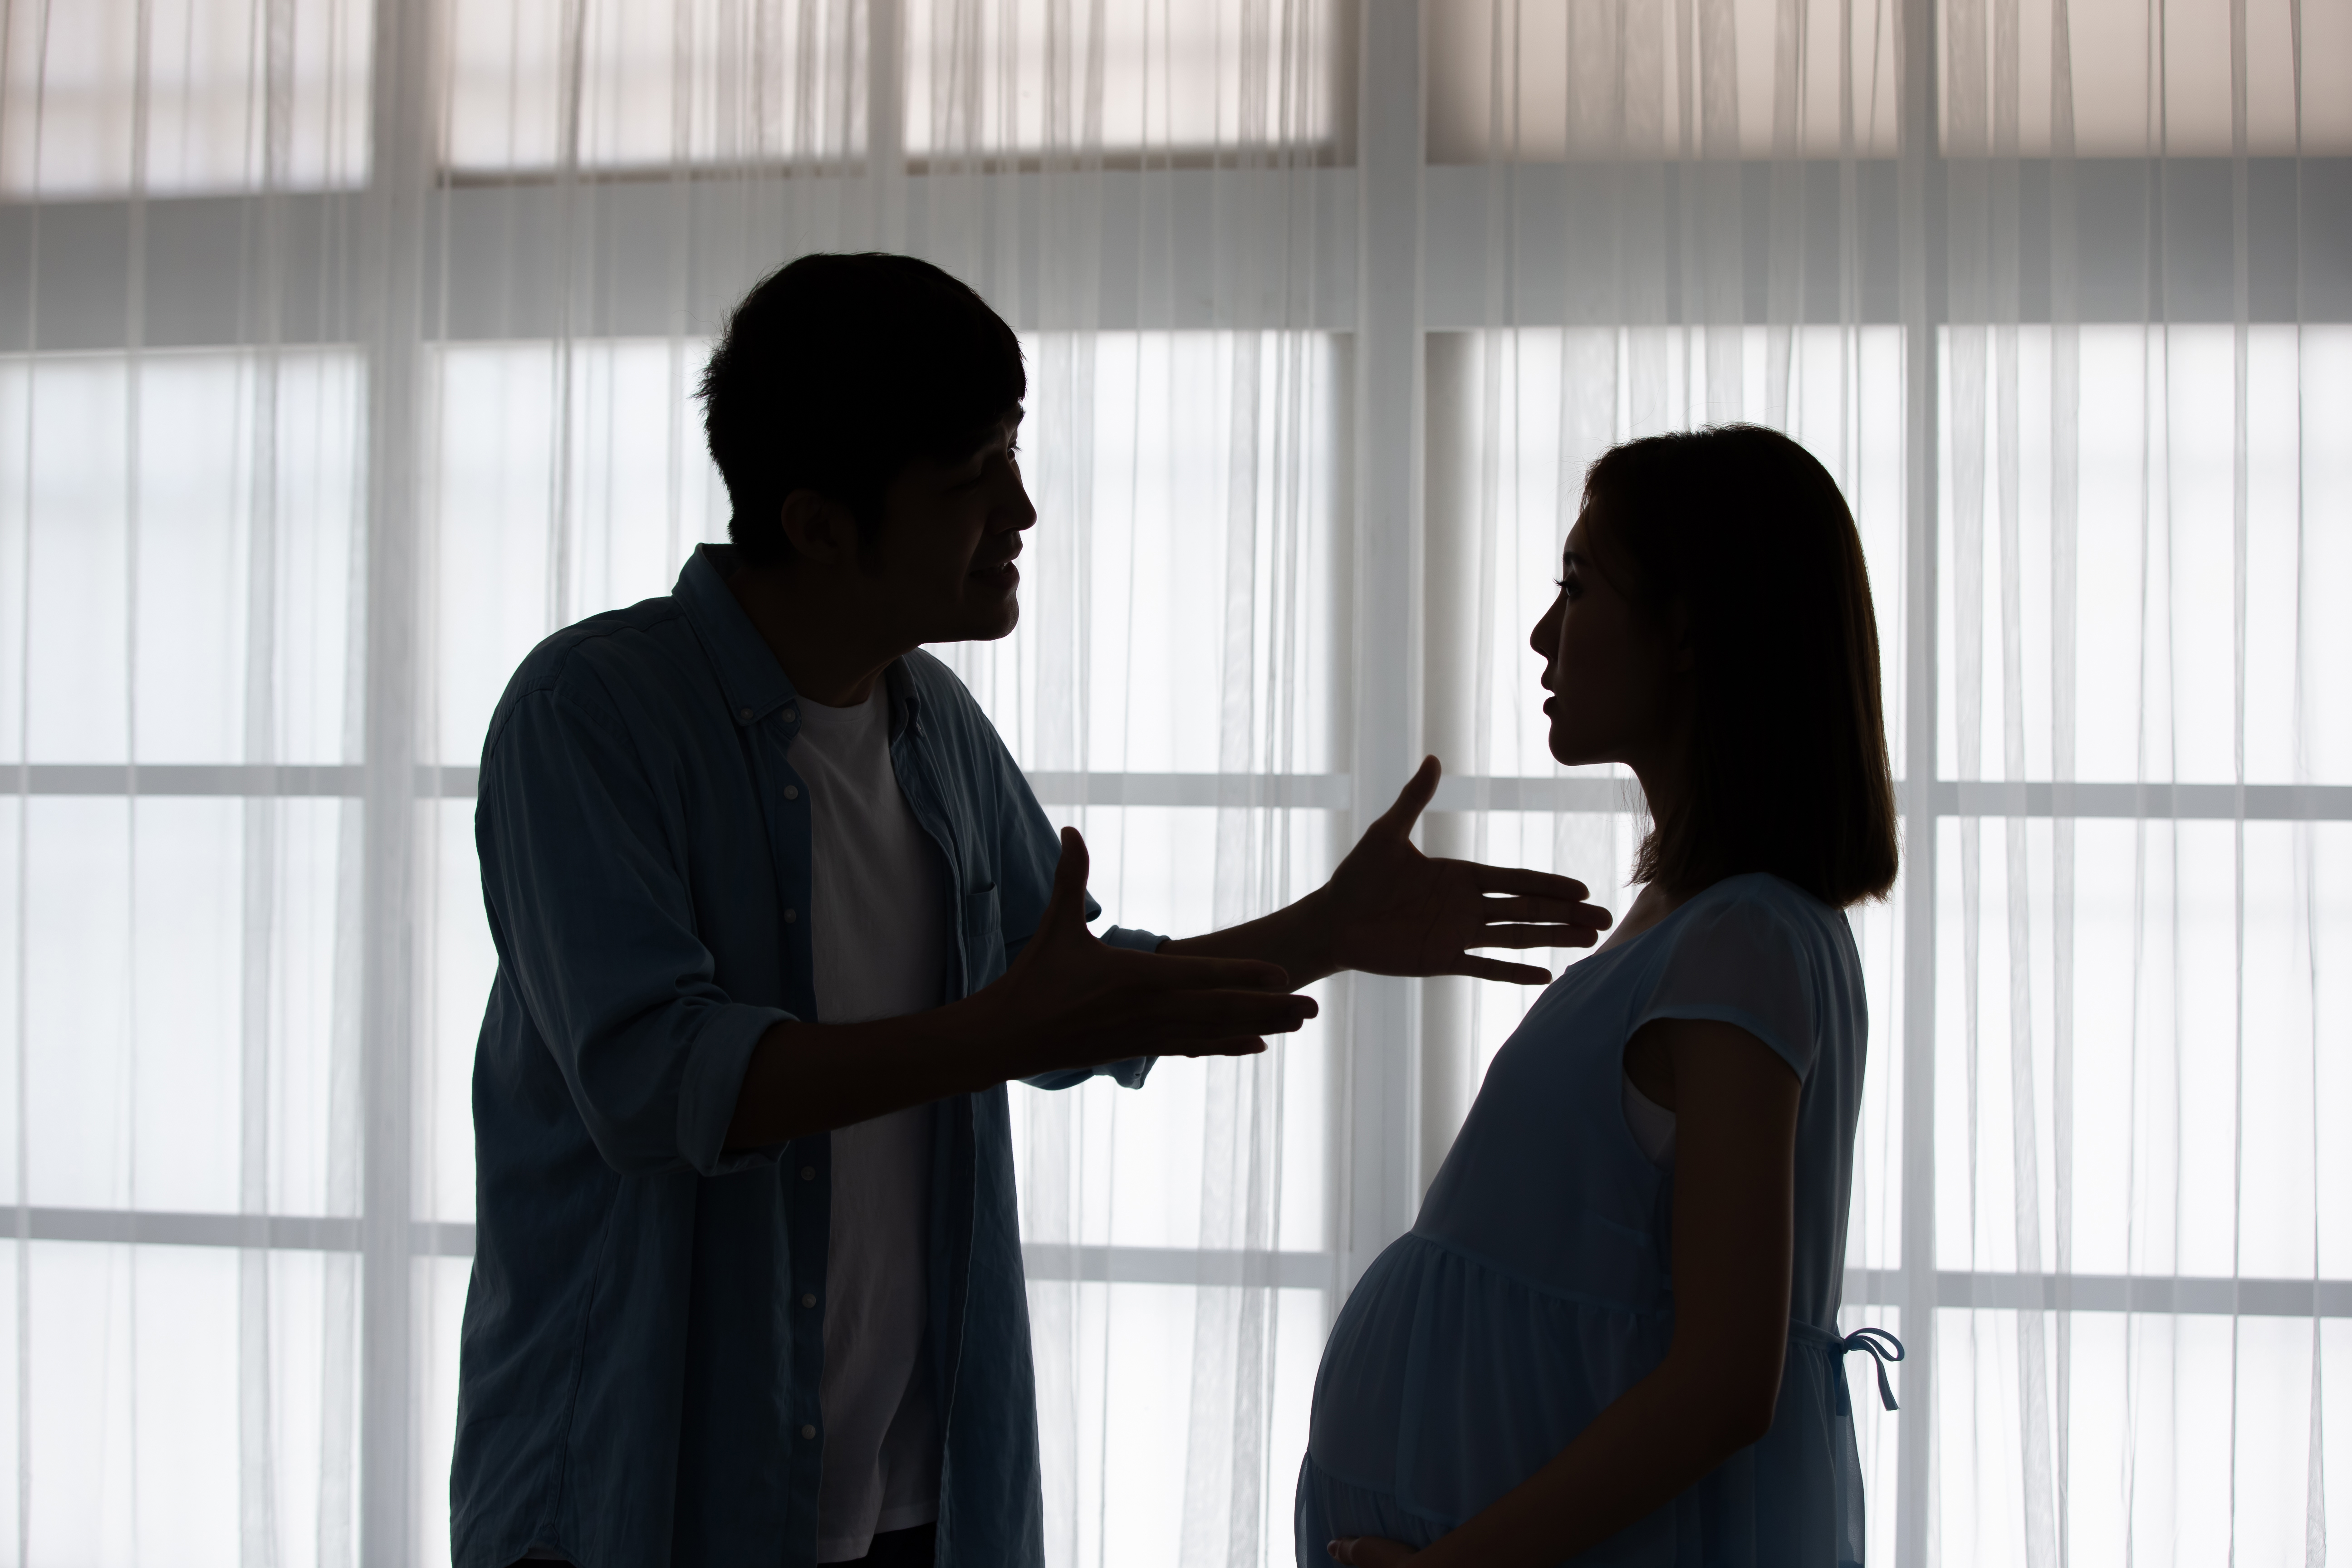 Silhouette of a man arguing with his pregnant wife | Source: Shutterstock